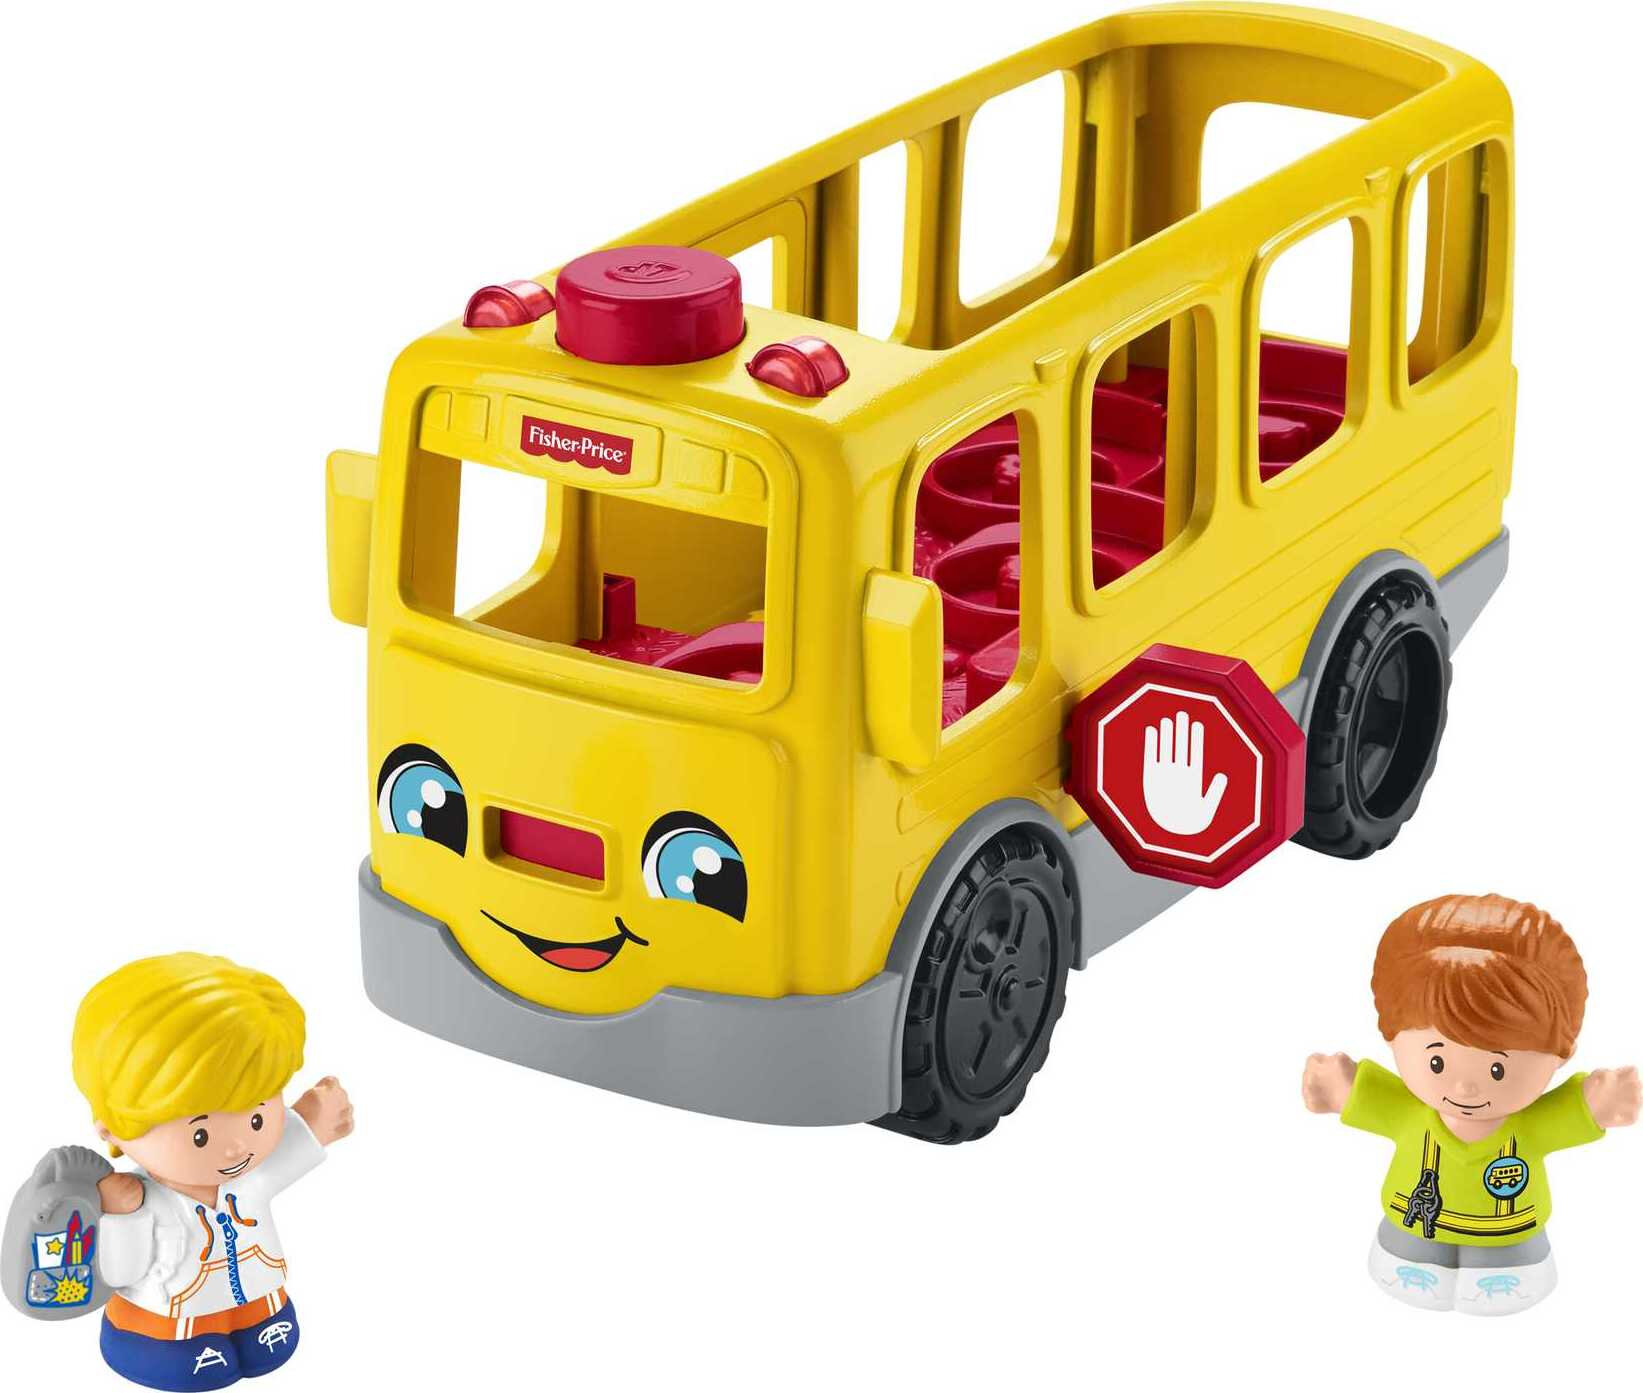 Little People Musical Toddler Toy Sit with Me School Bus with Lights Sounds for Ages 1+ Years - image 1 of 8